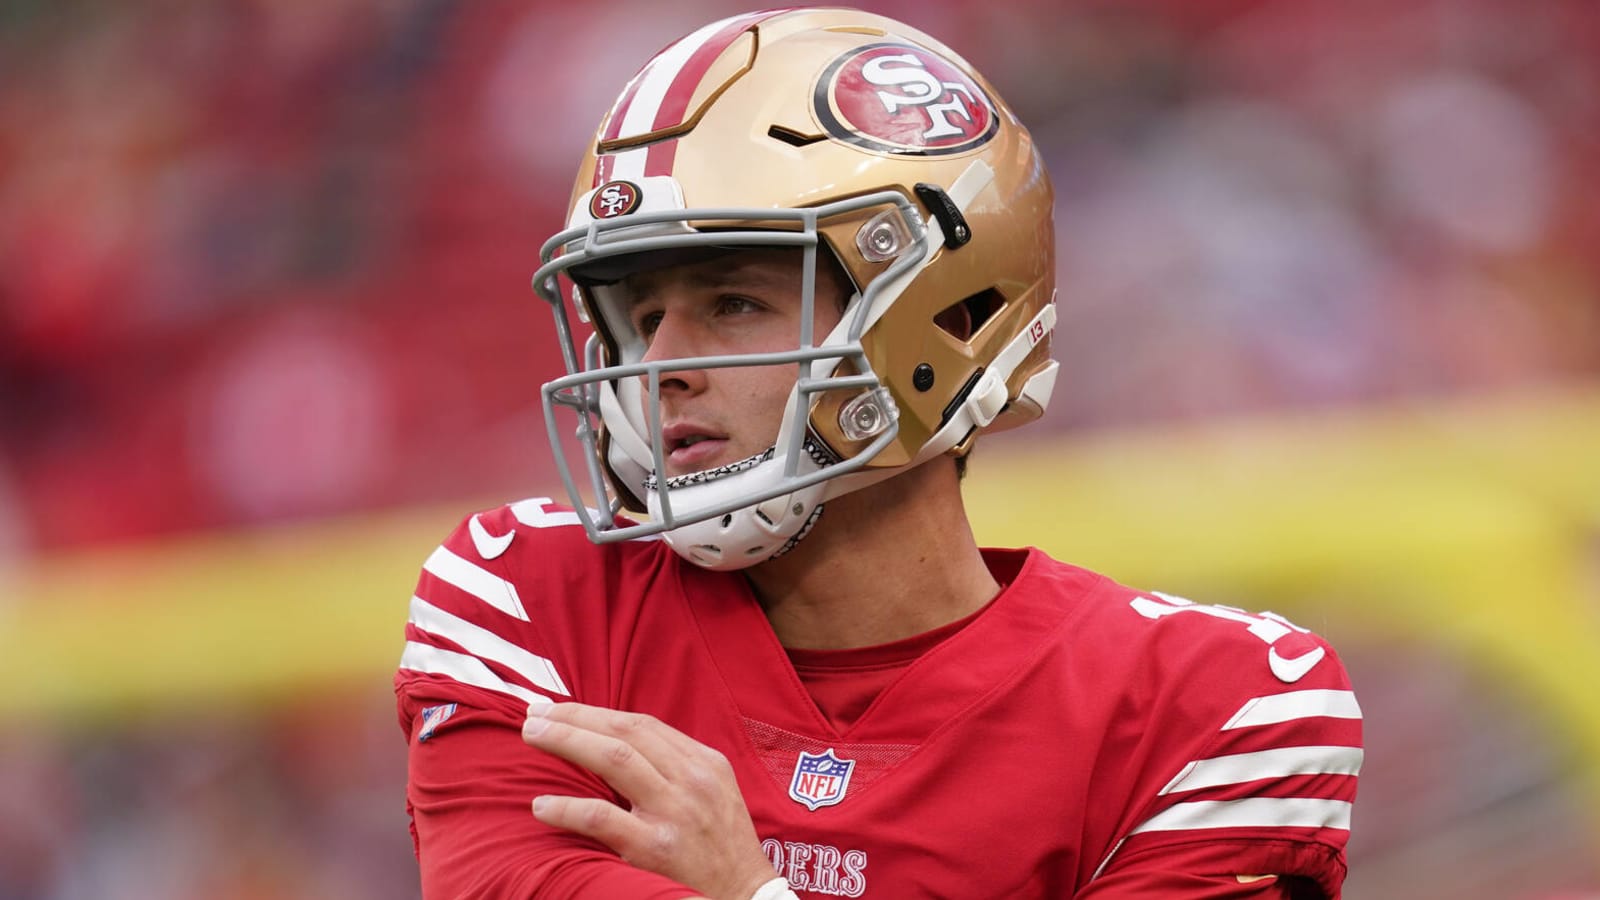 Brock Purdy gives credit to two teammates after 49ers' latest win